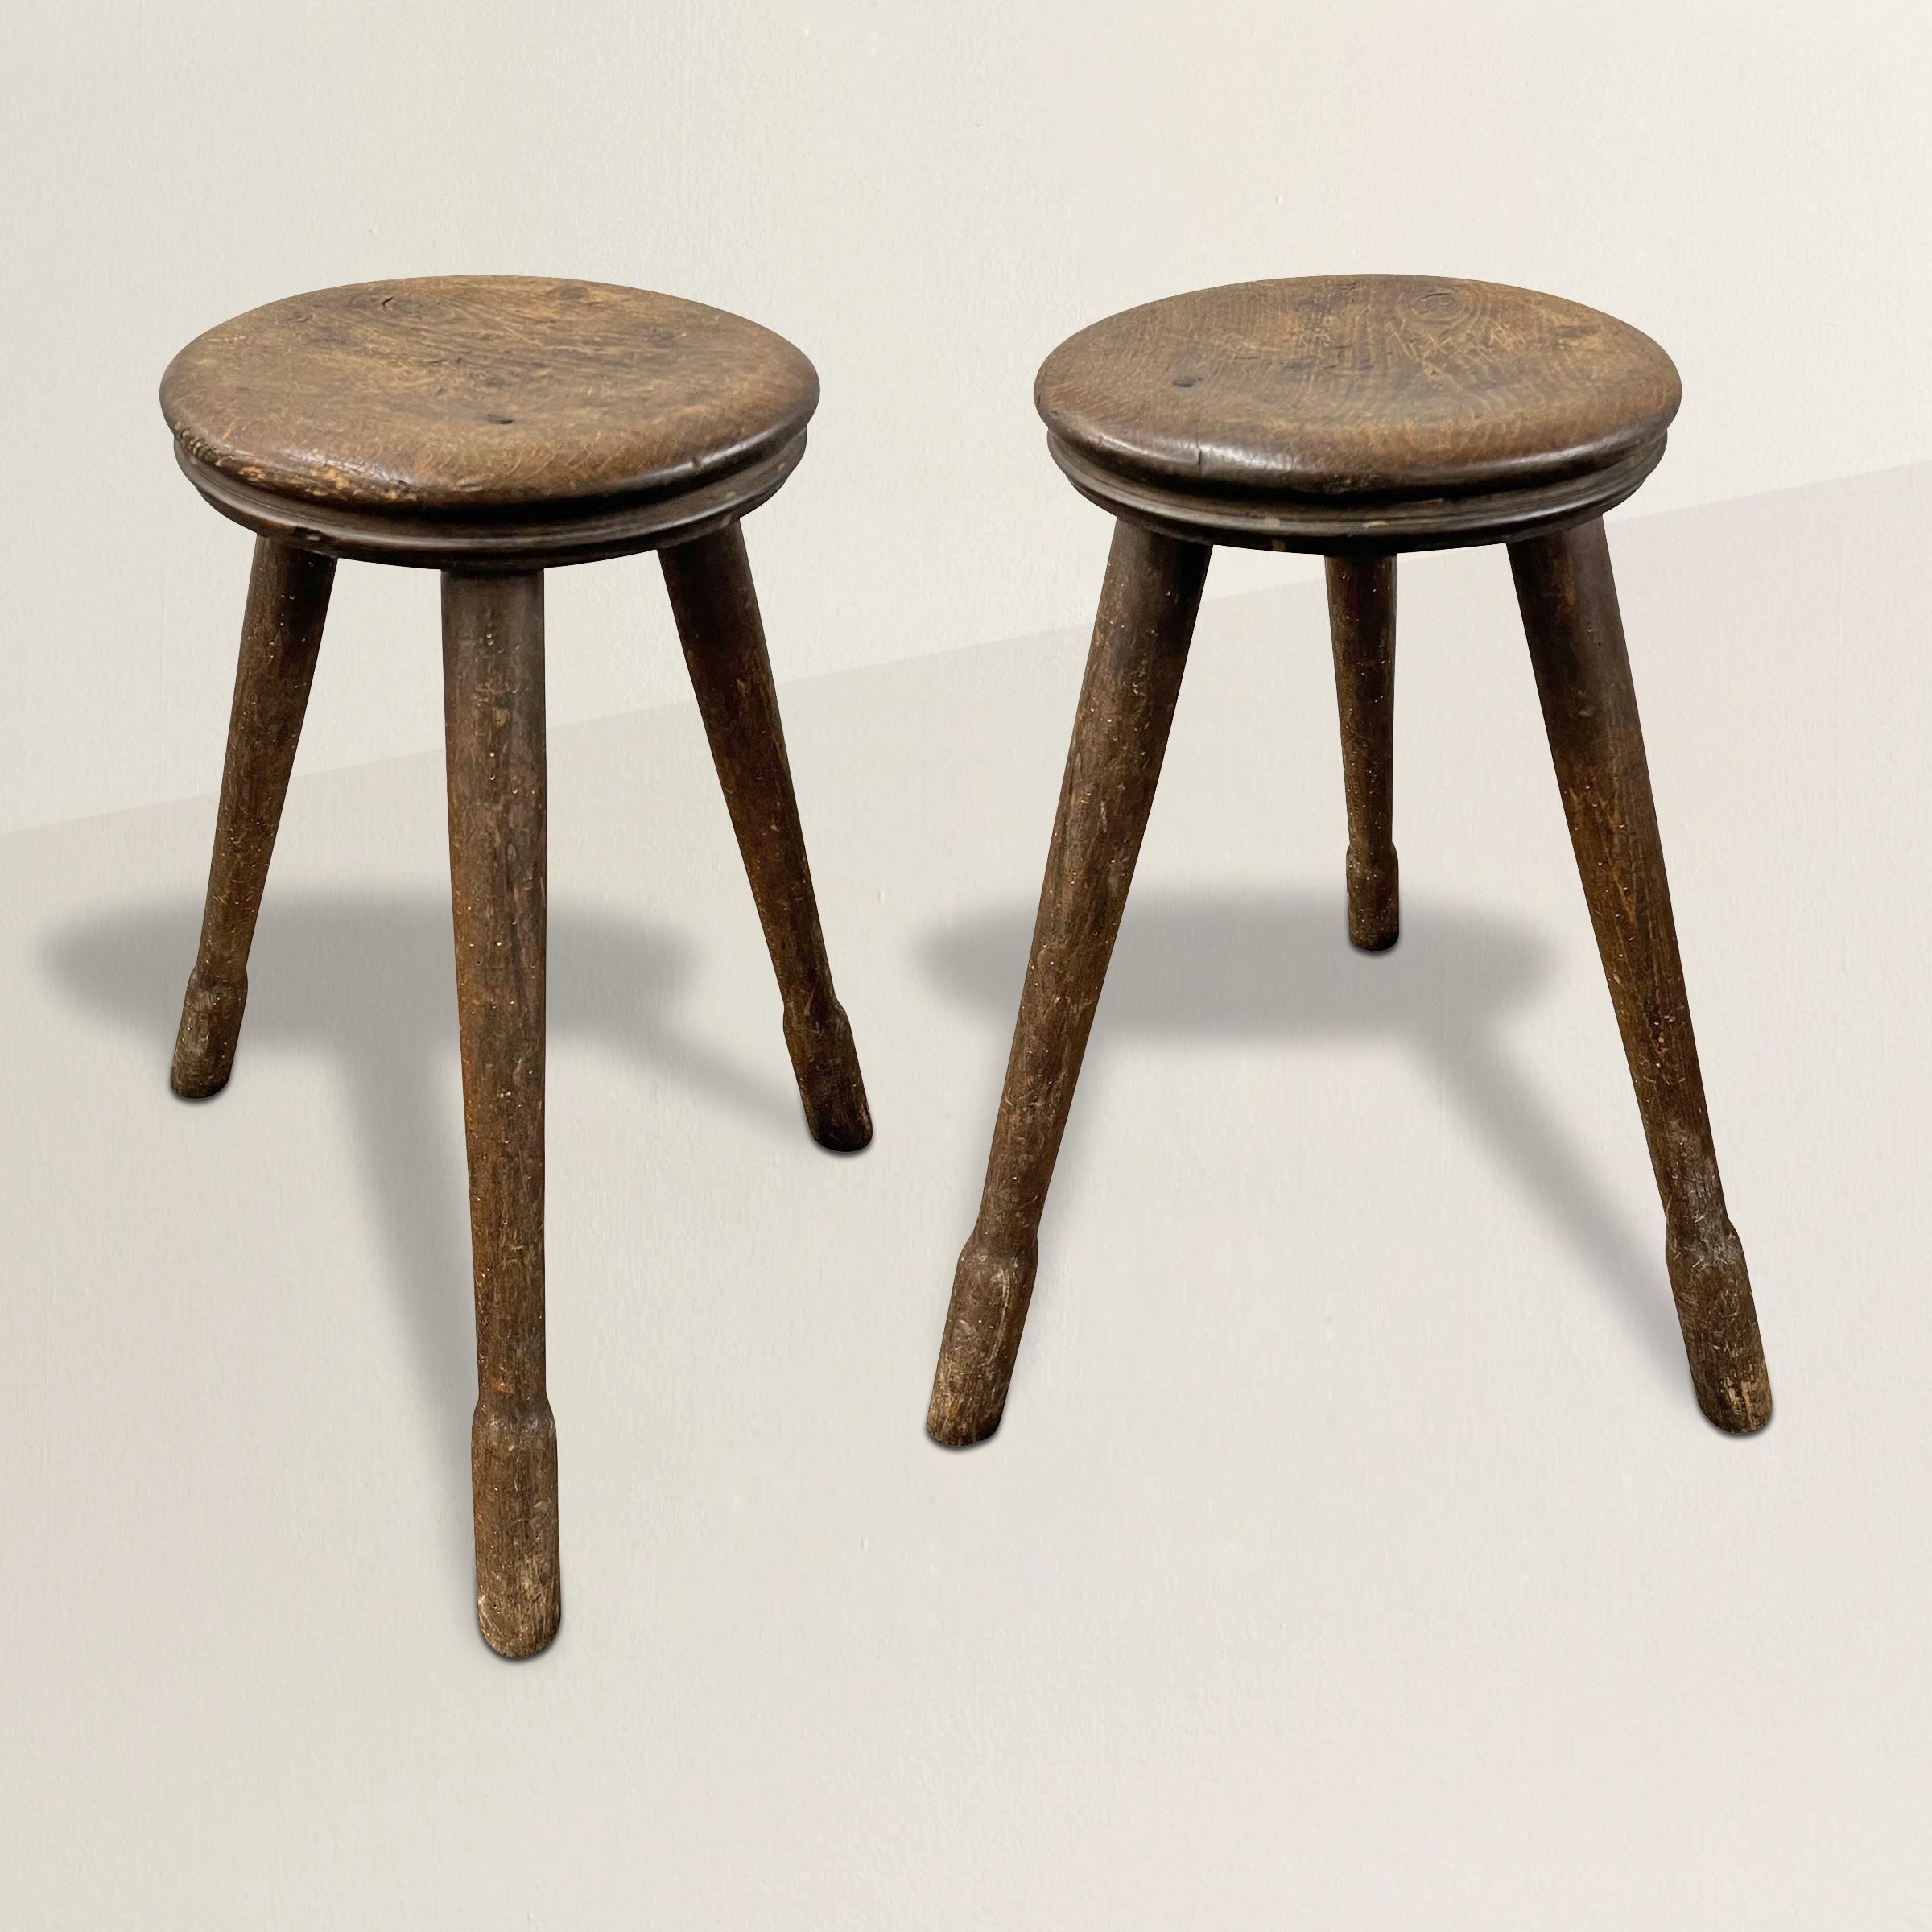 A pair of late 19th century French stools likely from a workshop or factory, with wonderfully worn seats, and each with three splayed turned legs with feet. Perfect height for counter stools, but would also work well as side tables next to your